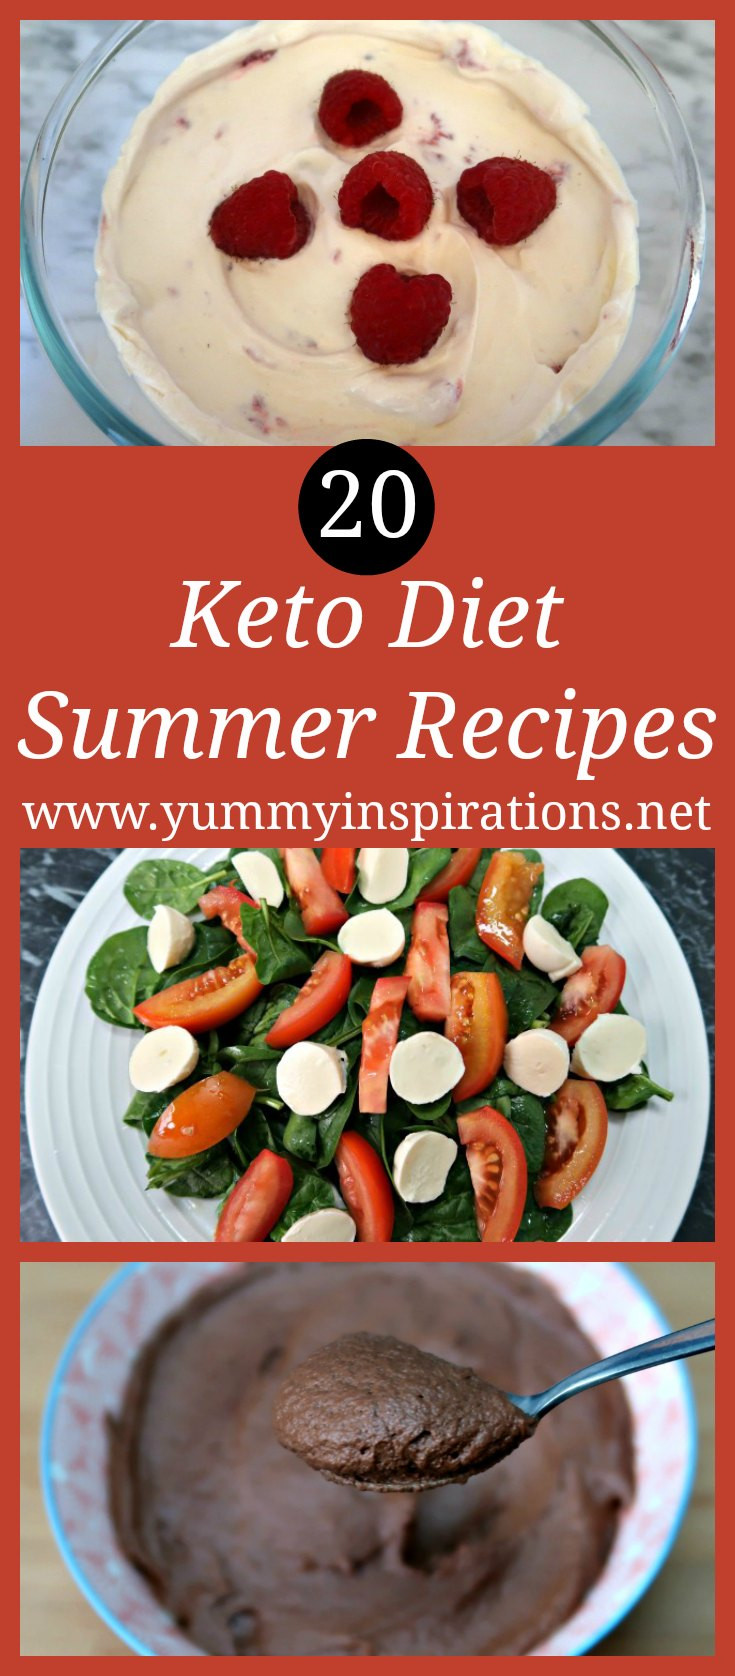 Summer Keto Meal Ideas 20 Keto Summer Recipes Easy Low Carb & Ketogenic Meals